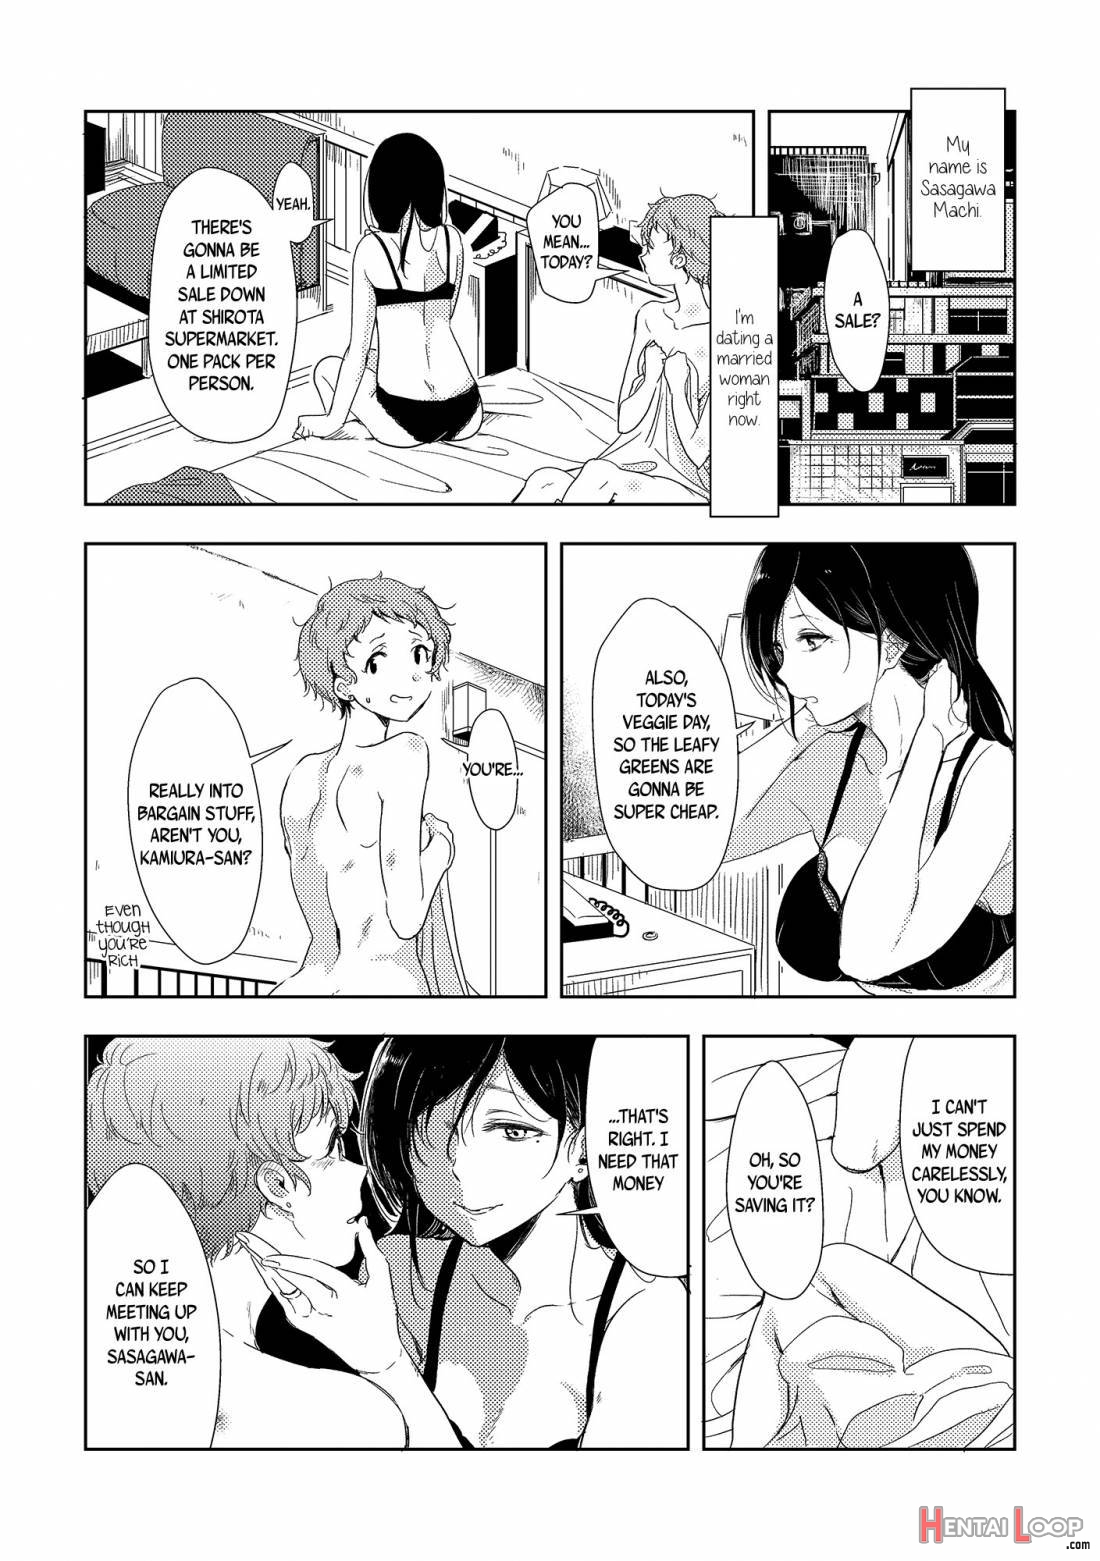 The Mysterious Kamiura-san page 2